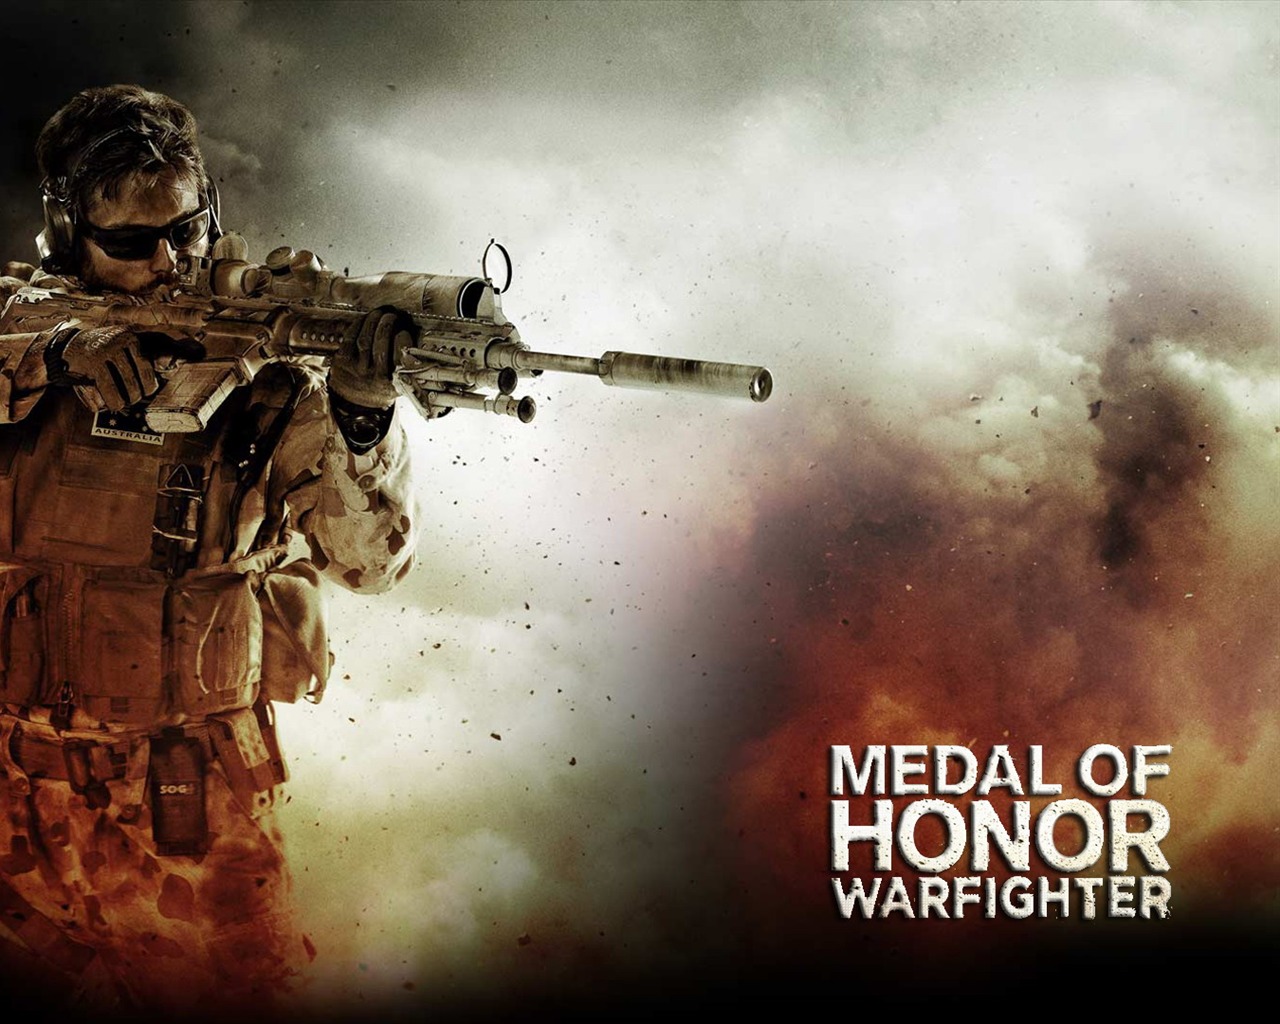 Free Download Medal Of Honor Warfighter Game Hd Wallpaper 04 1280x1024 Wallpaper 1280x1024 For Your Desktop Mobile Tablet Explore 48 Medal Of Honor Warfighter Wallpaper Medal Of Honor Wallpaper